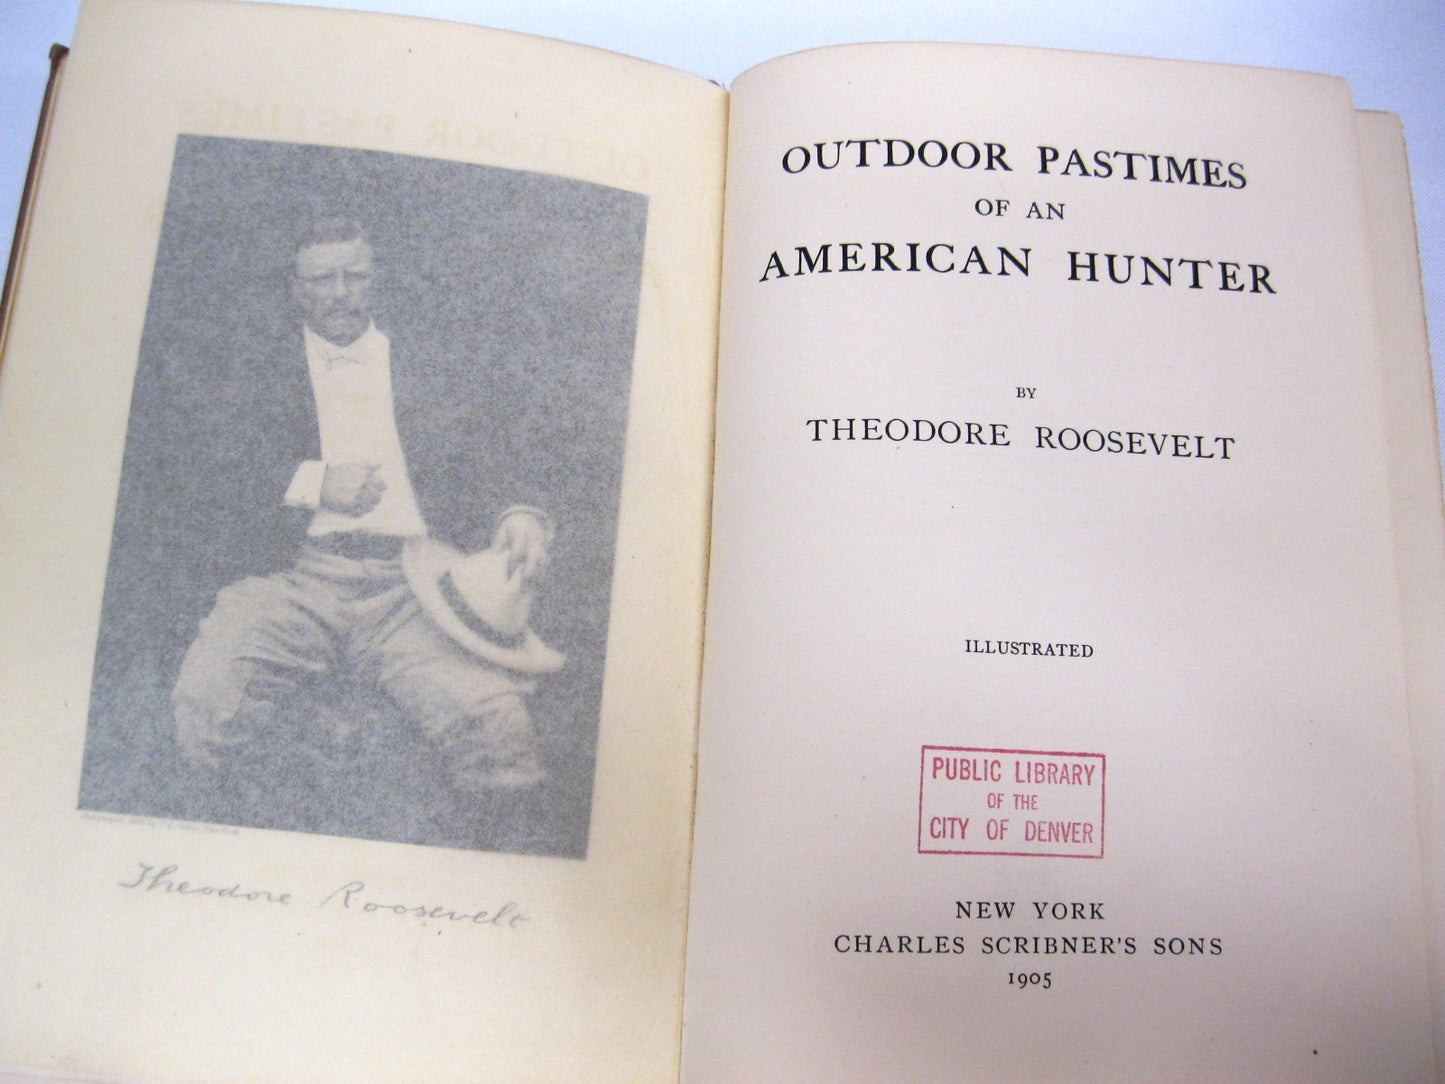 Outdoor Pastimes of an American Hunter by Theodore Roosevelt